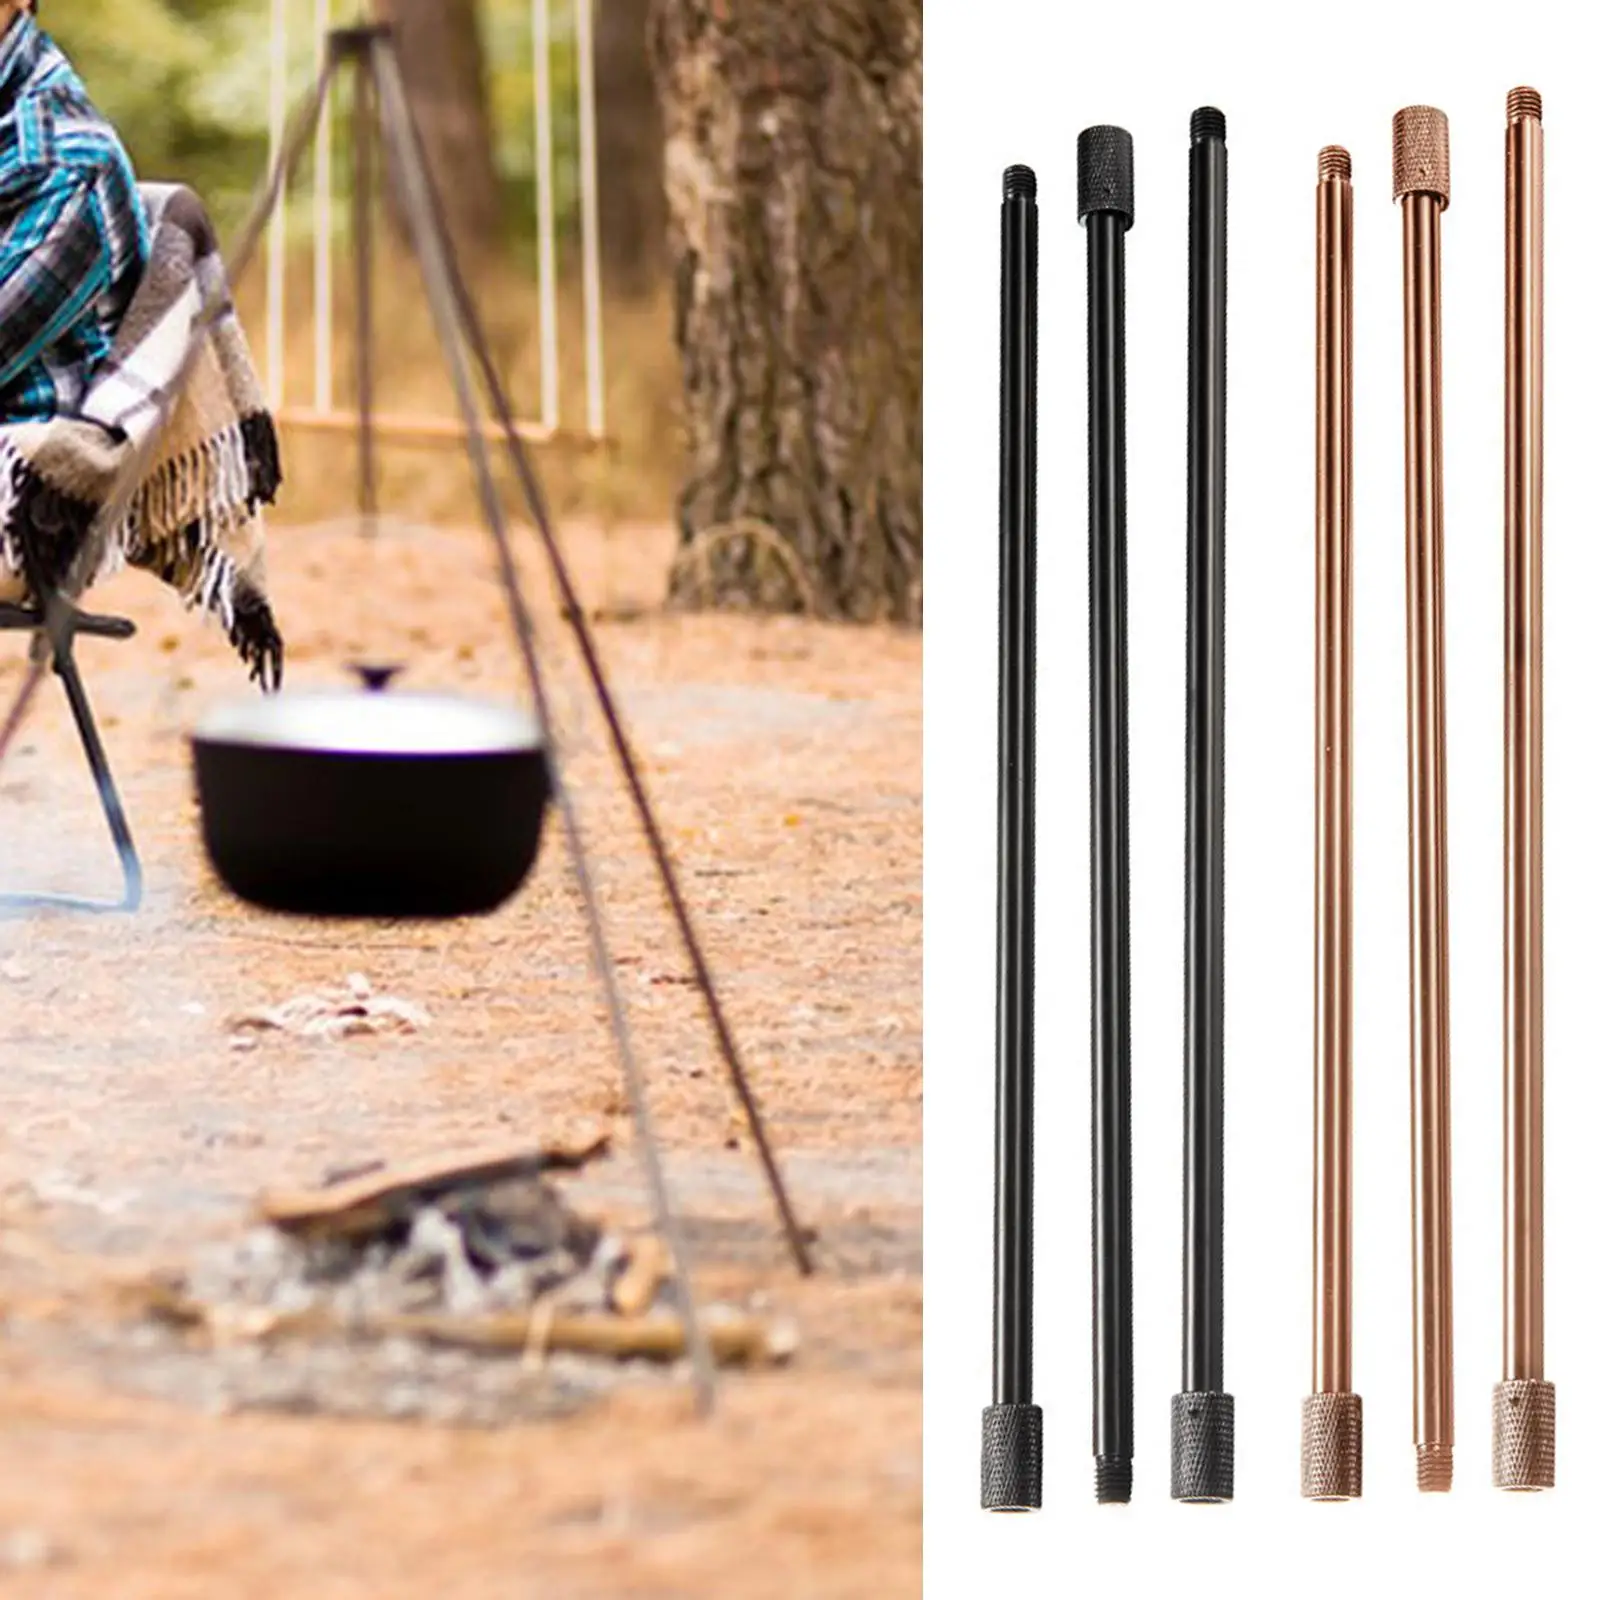 Outdoor Camping Cooking Set Tripod Camping Cookware Resistant Camp Accessories Mess Set Durable Hanging Bracket for BBQ